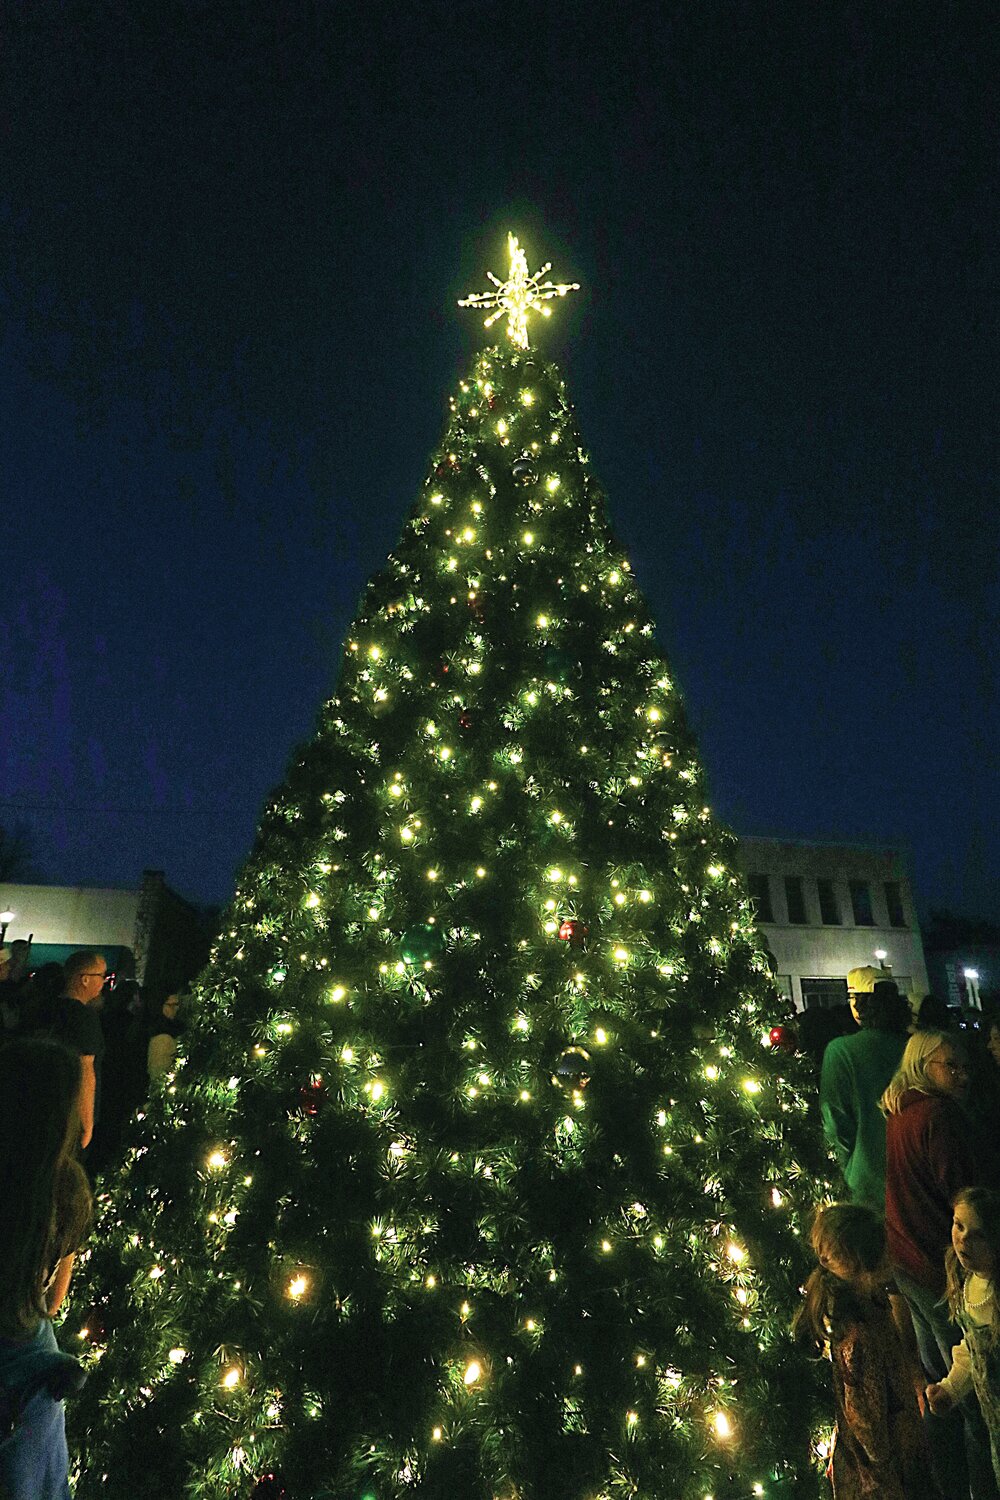 The Christmas tree is the focal point of the downtown lights.